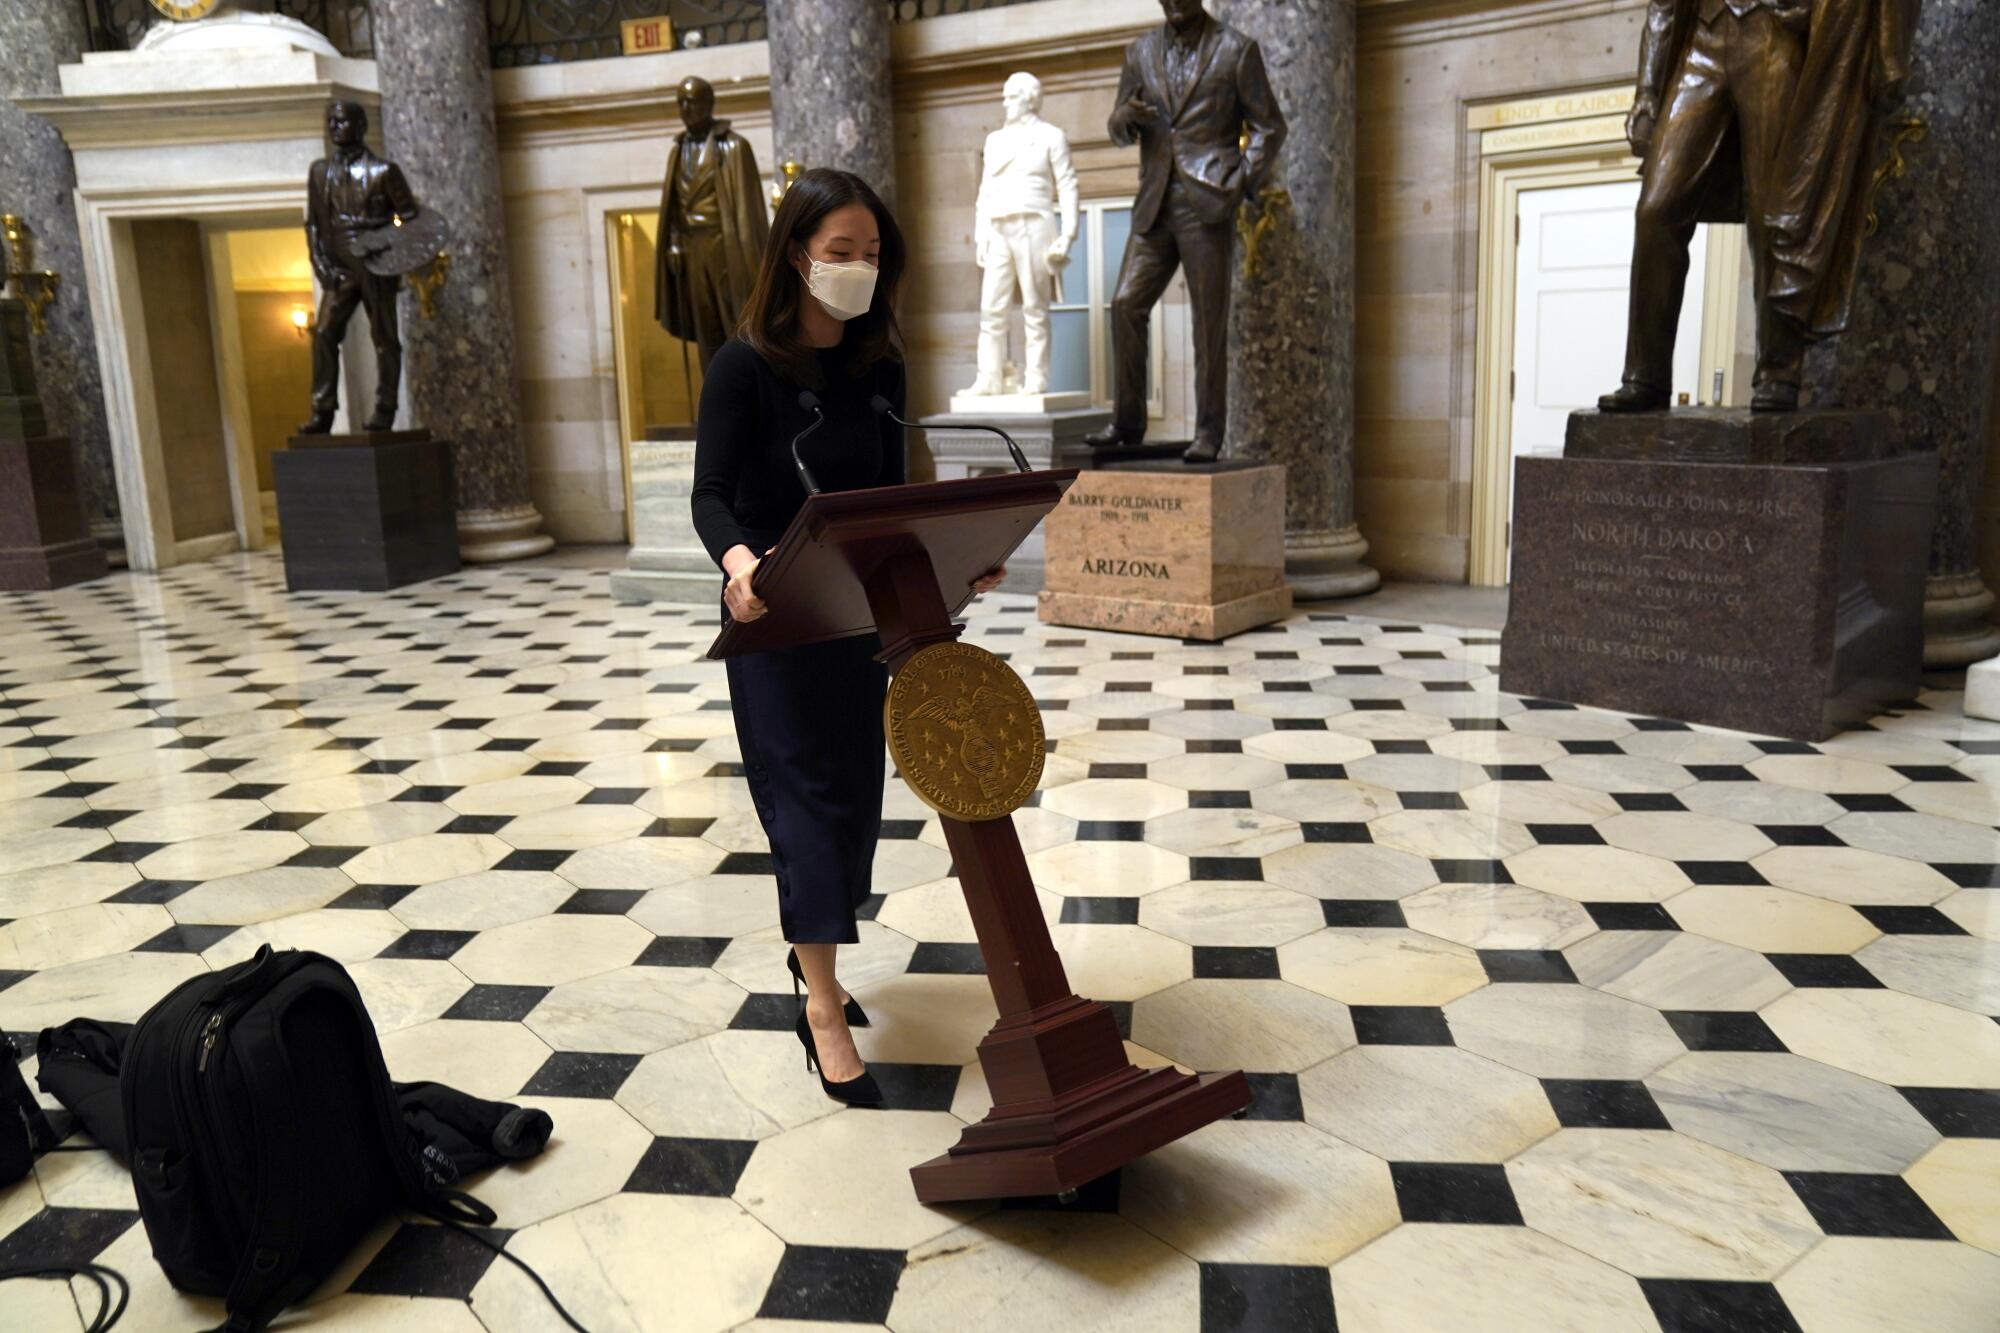 A woman tilts a lectern on a tiled floor. Statues are seen in the background. 